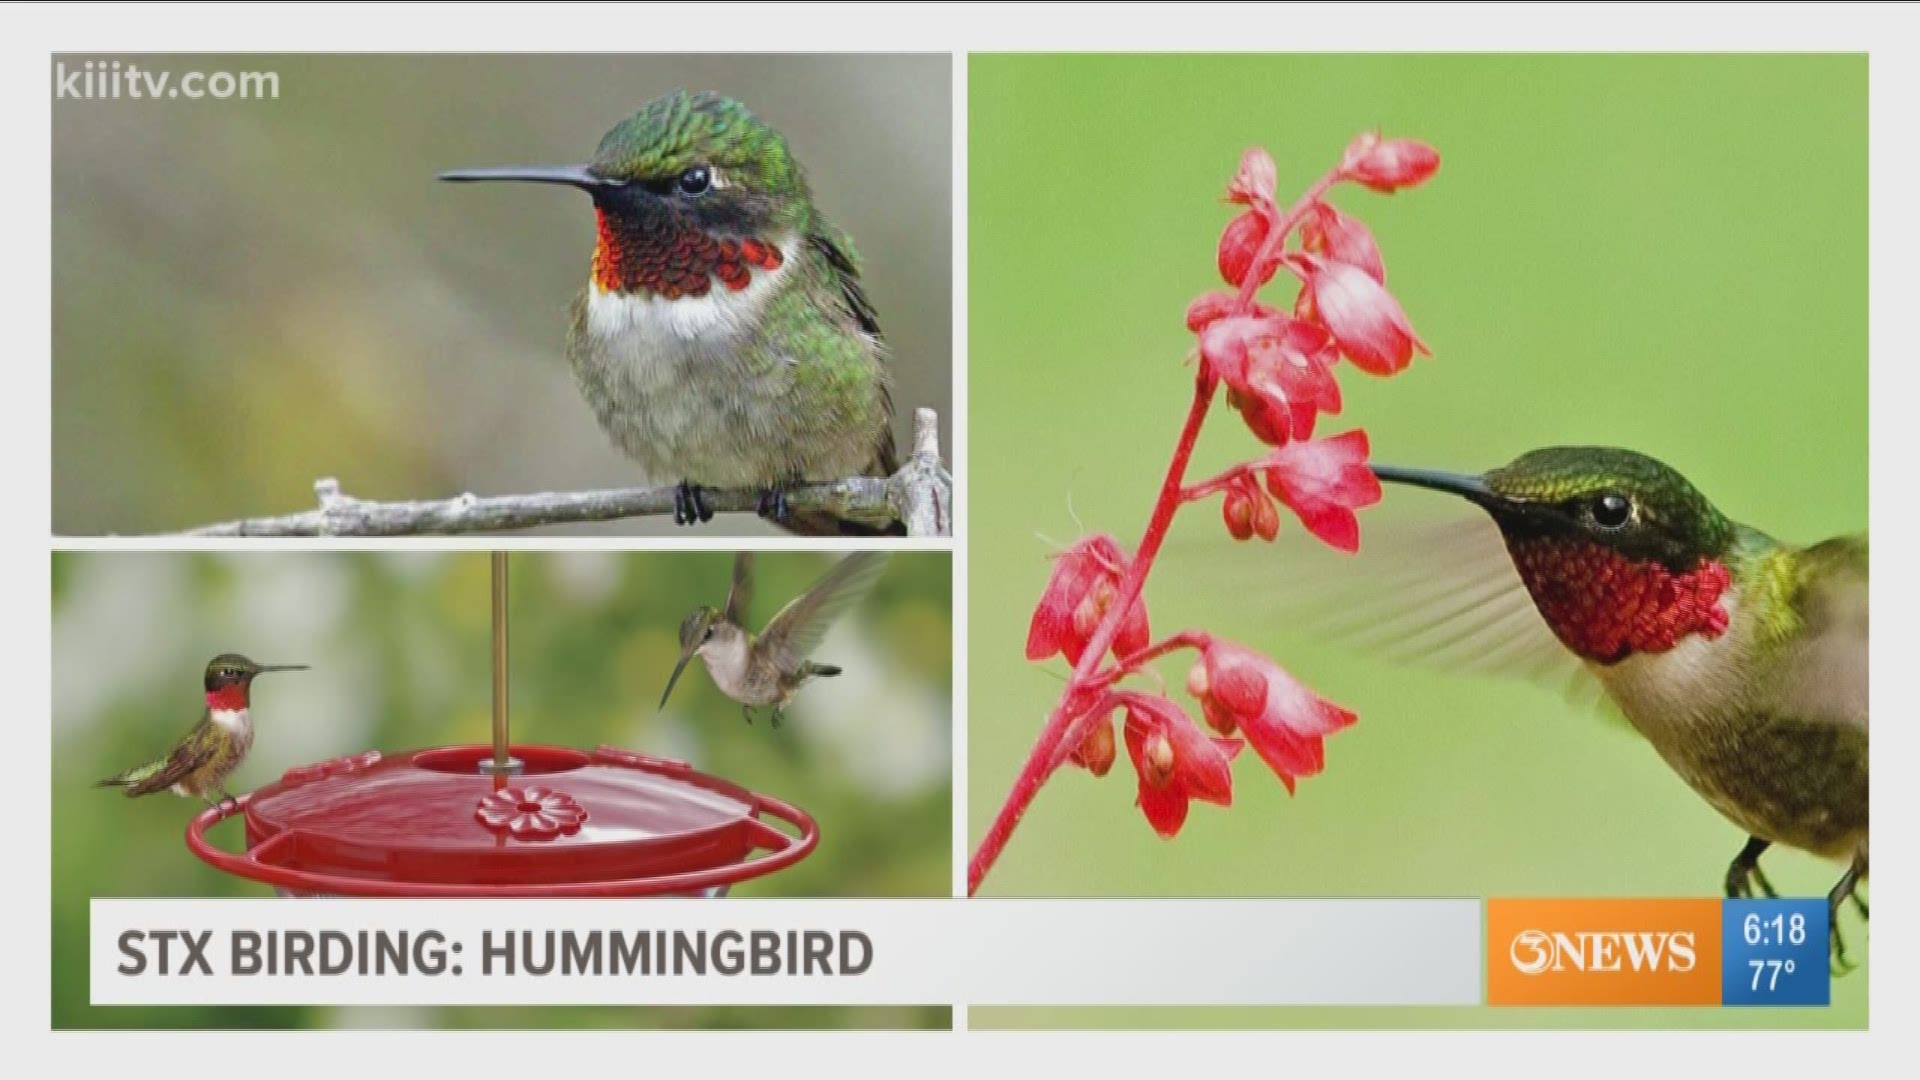 Humming birds and a local festival featuring the birds